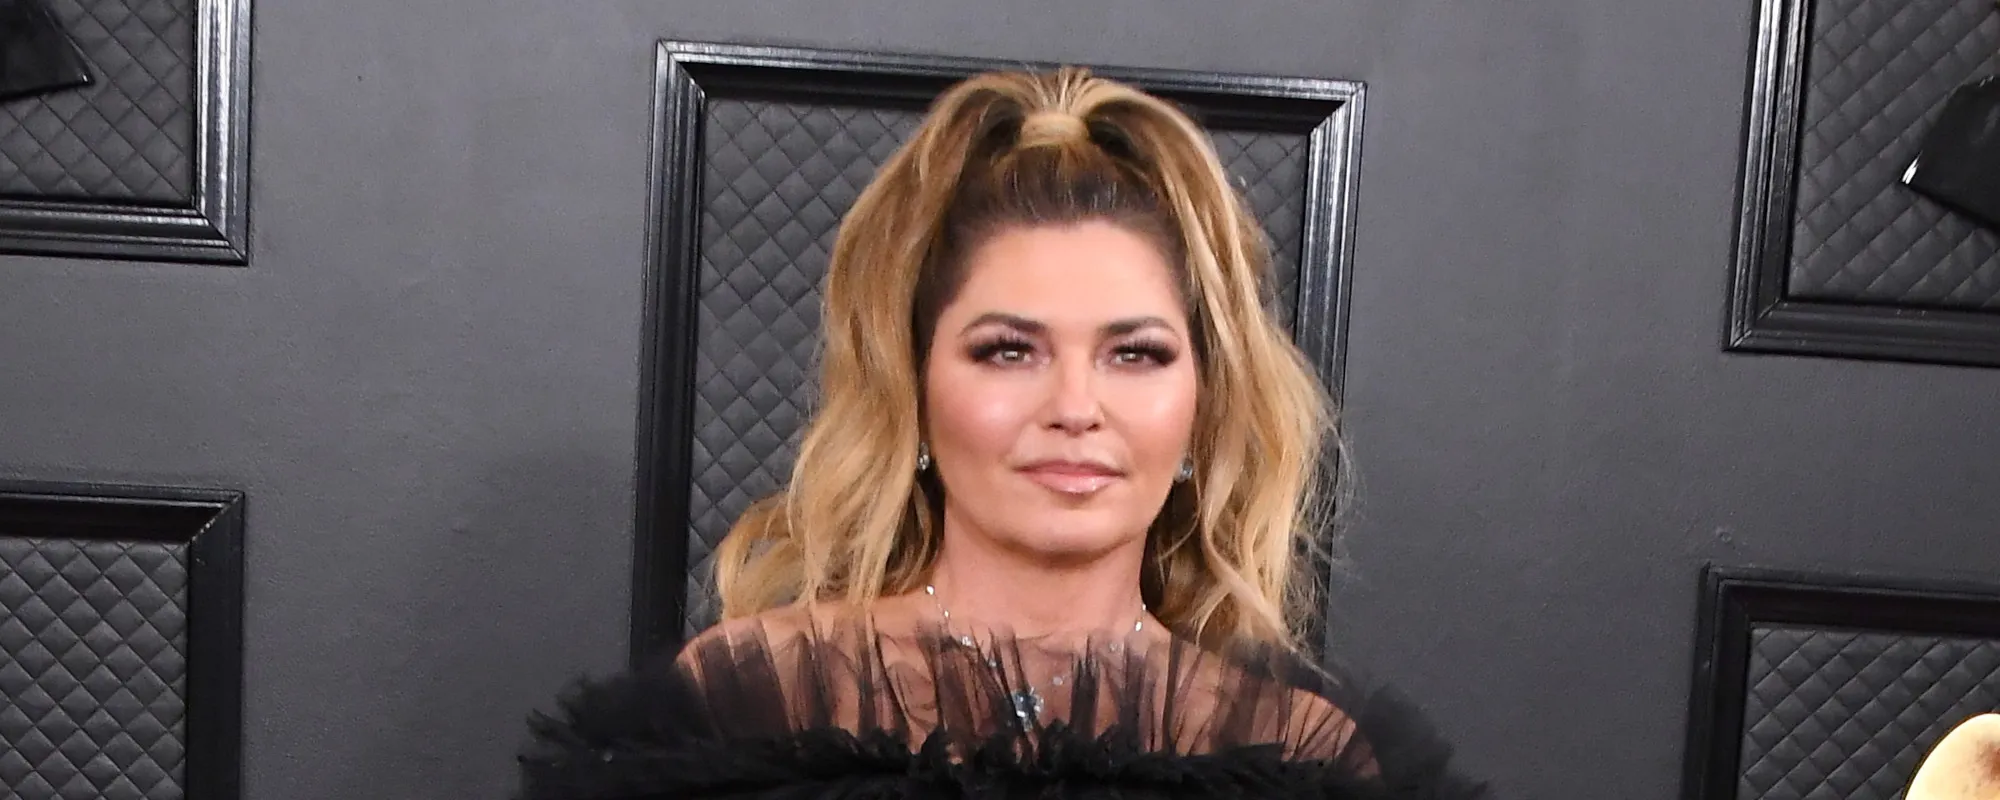 Shania Twain in Final Talks to Participate in ‘Beauty and the Beast’ Television Special